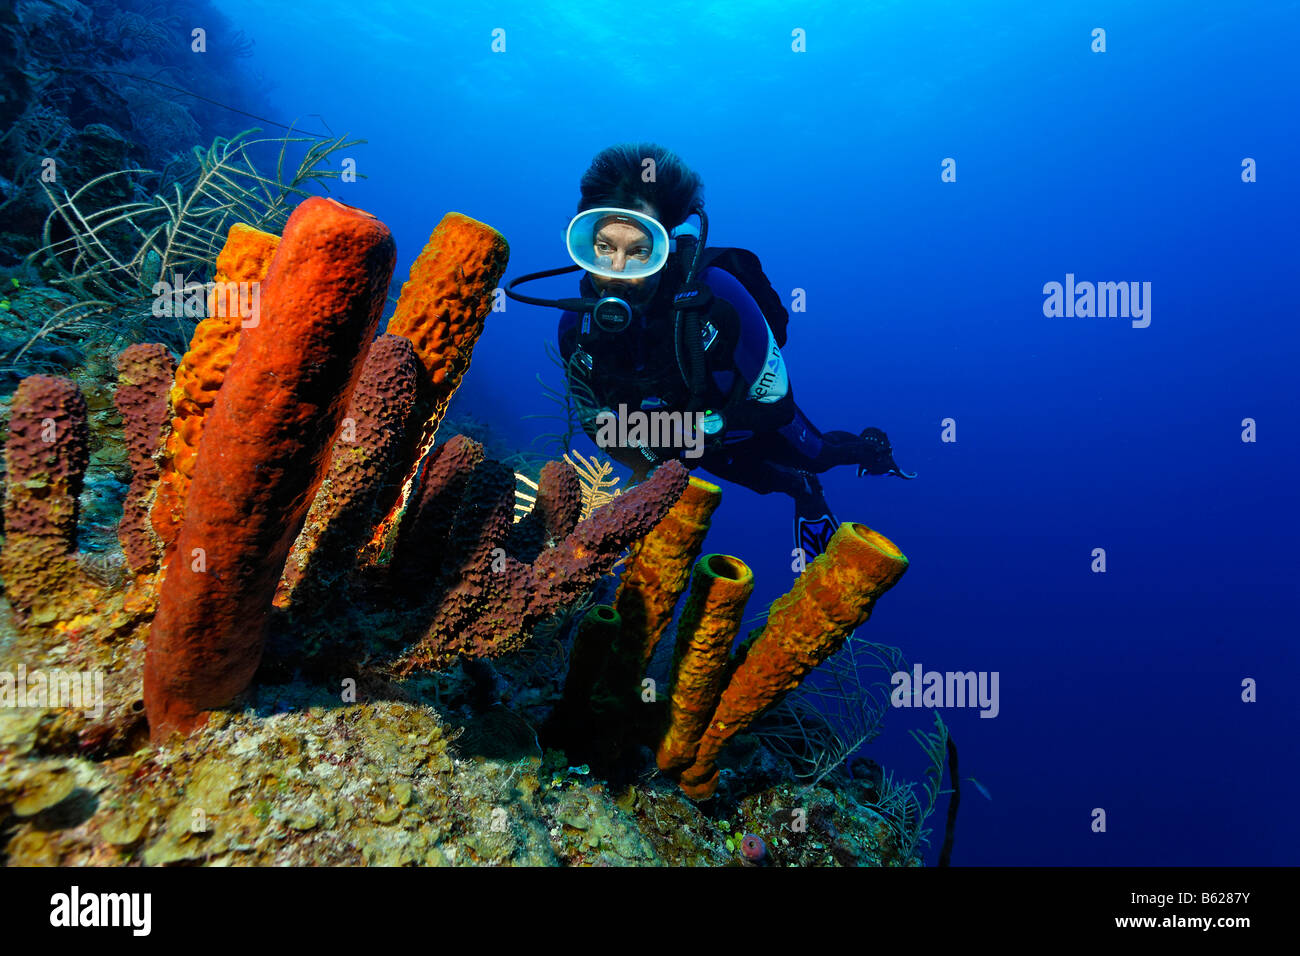 Female diver looking at a group of various sponges on a sloping coral reef, Hopkins, Dangria, Belize, Central America, Caribbean Stock Photo